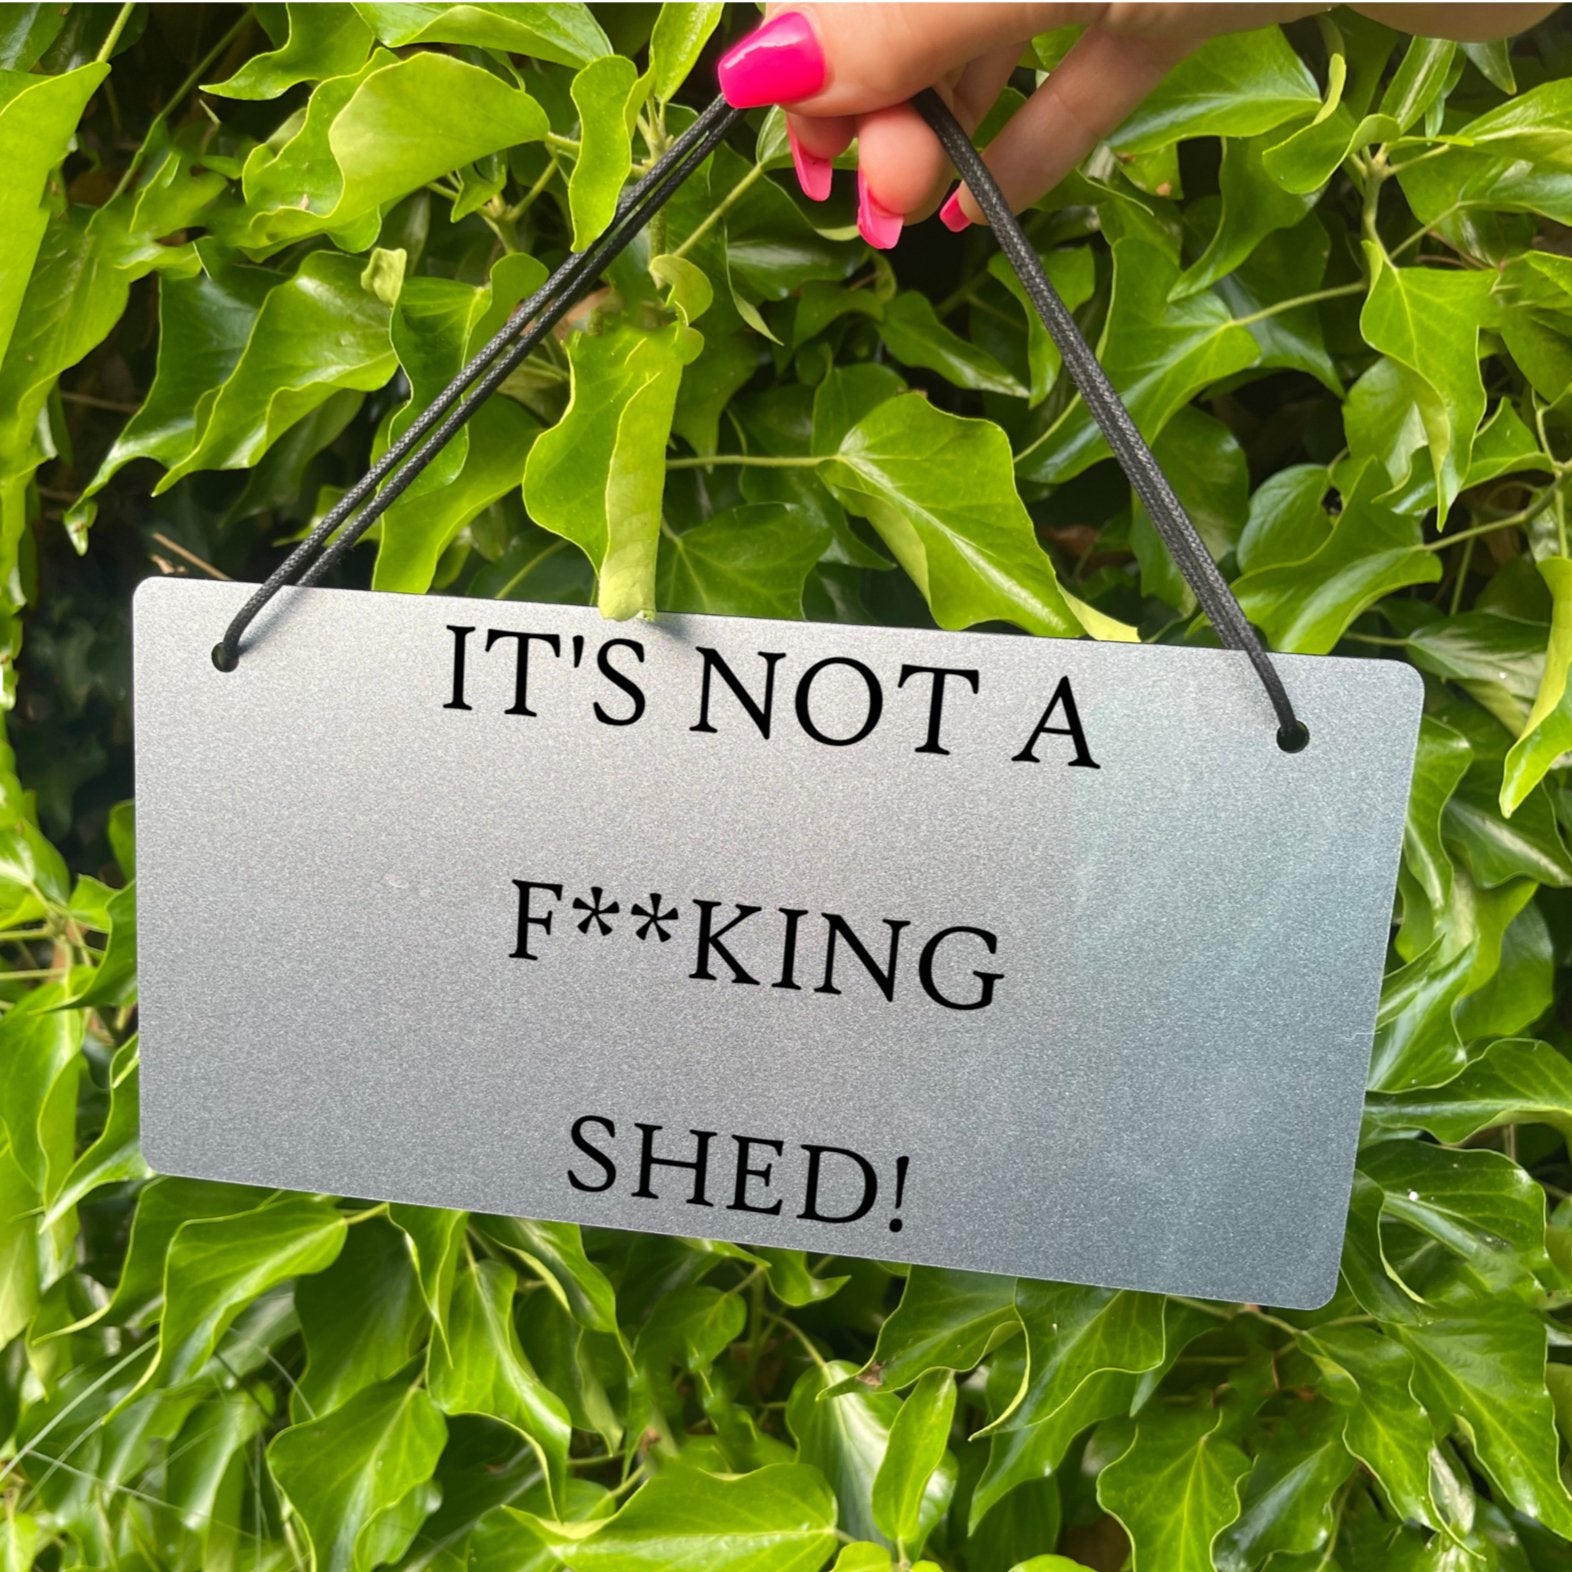  "'IT'S NOT A FKING SHED' Sign in Gold Color" Description: Close-up of a gold-colored acrylic sign featuring engraved text that reads "IT'S NOT A FKING SHED." The sign is made from high-quality 3mm thick acrylic and has 5mm holes for easy hanging.